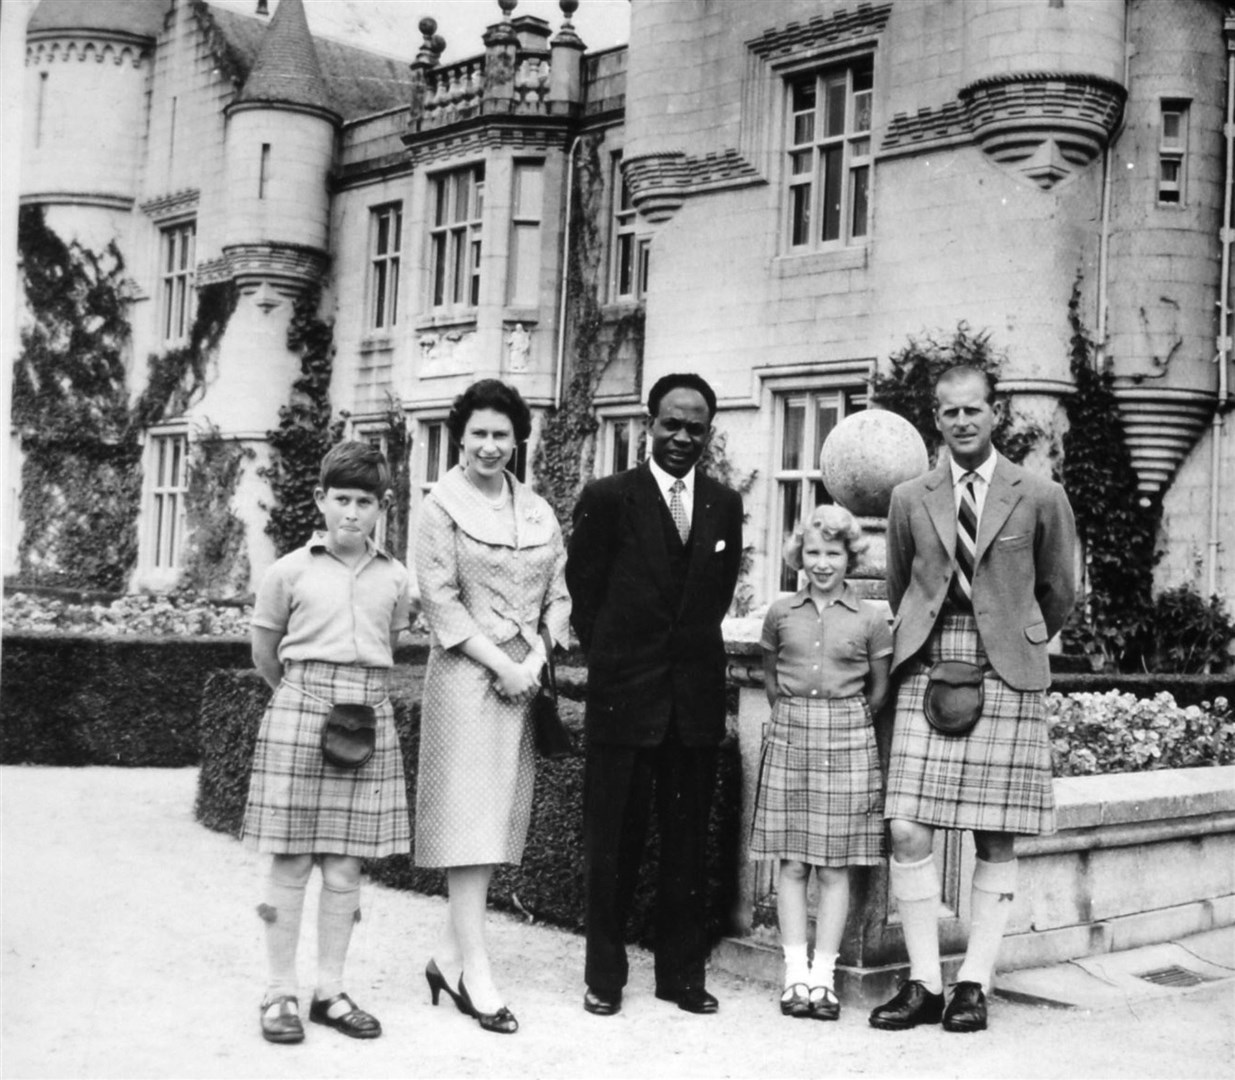 Dr Kwame Nkrumah, Prime Minister of Ghana, with the Queen, Philip, the Prince of Wales and Princess Anne at Balmoral in 1959 (PA)